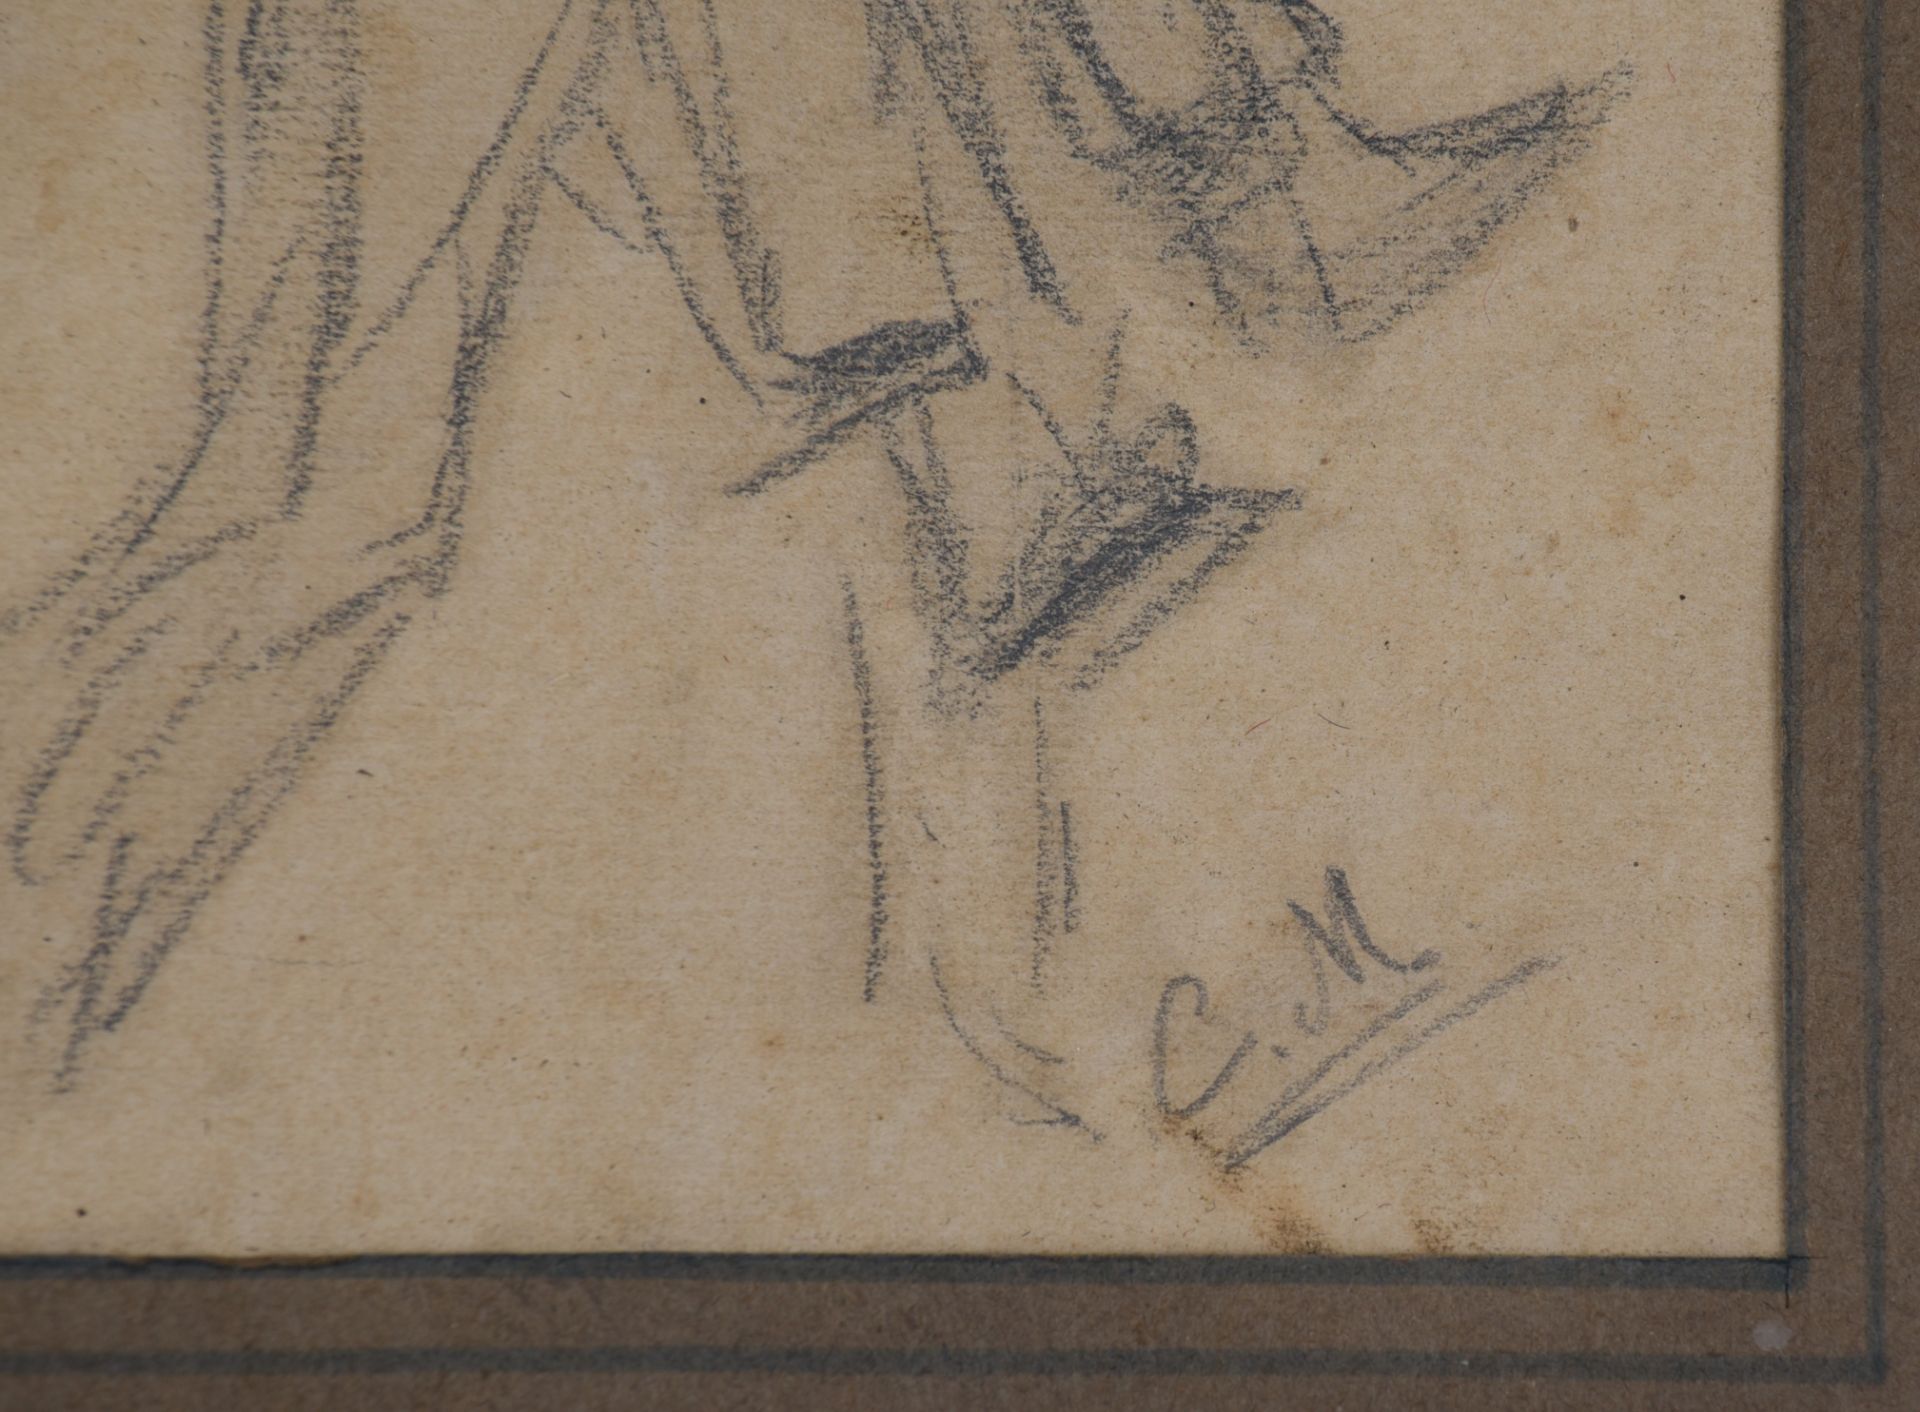 (T) Constantin Meunier (1831-1905), study drawing, charcoal on paper, 11 x 19 cm - Image 11 of 12